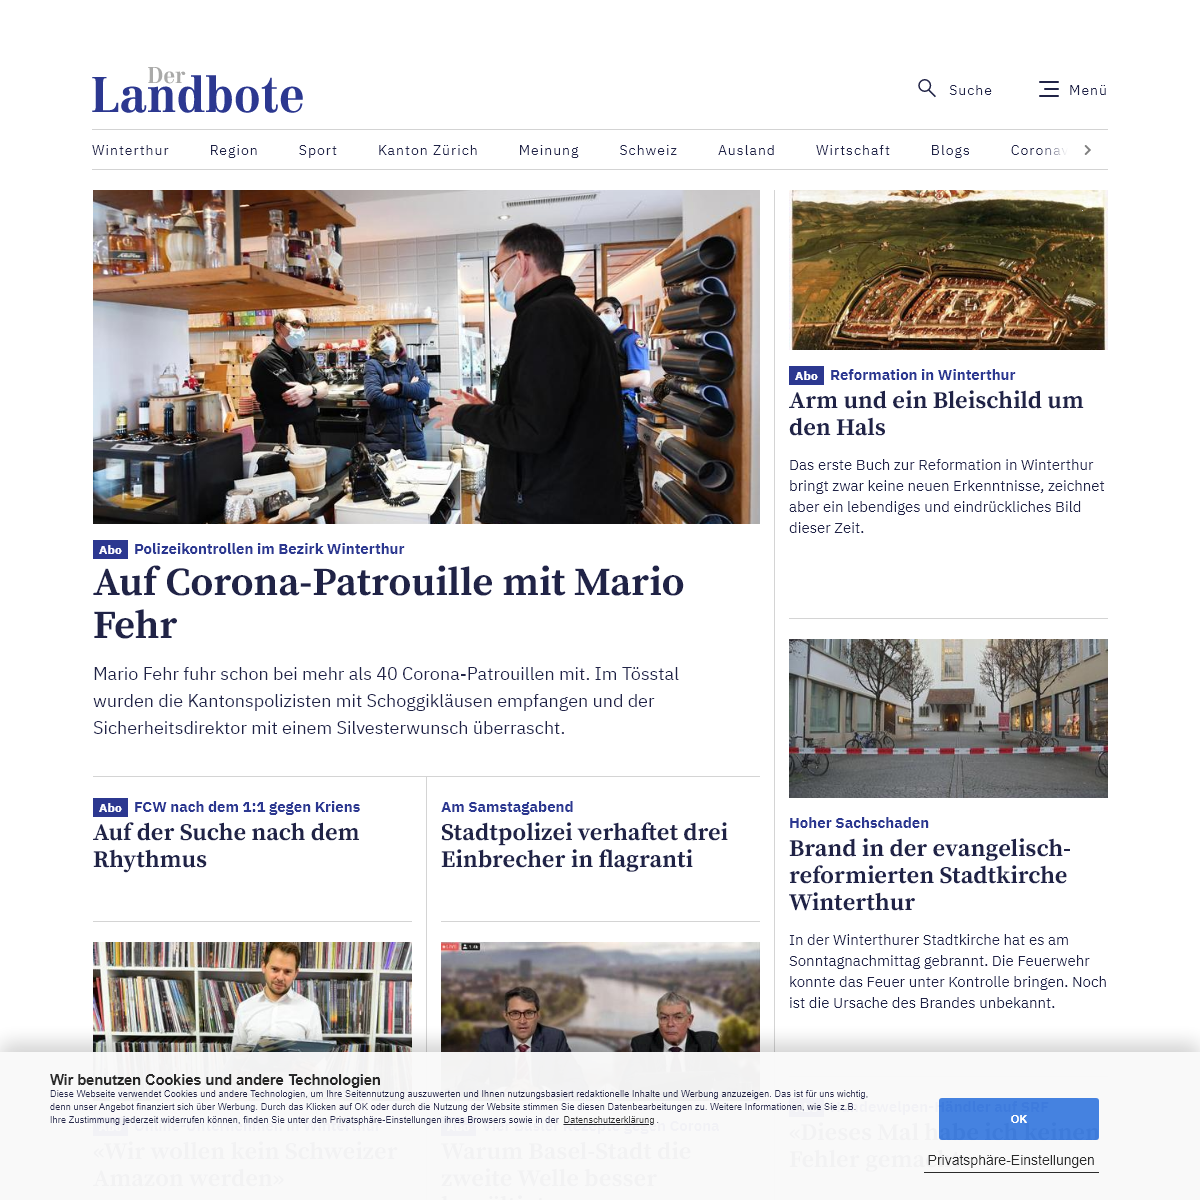 A complete backup of landbote.ch